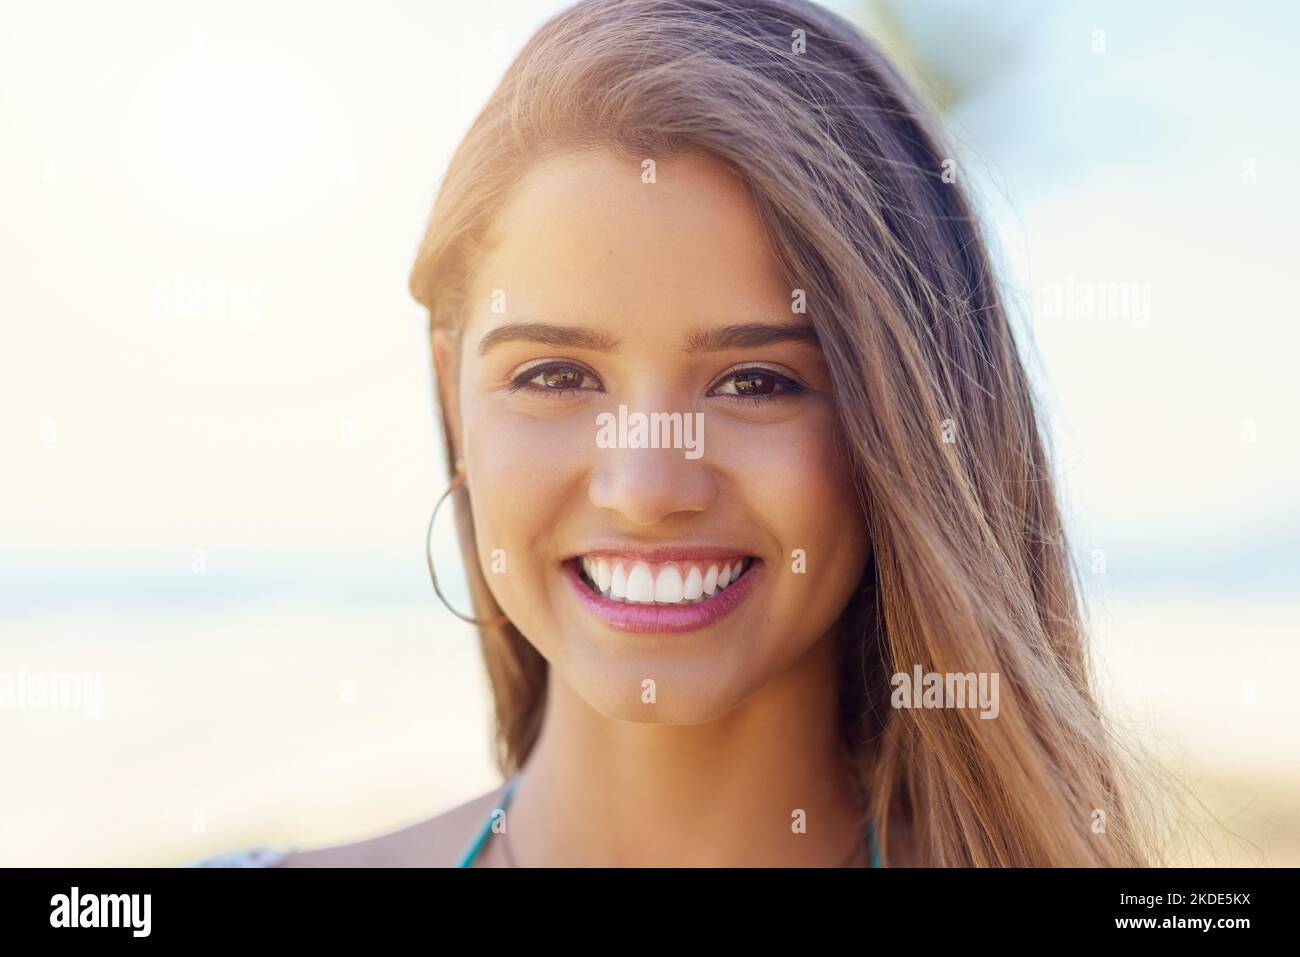 Enjoying summer sun. Portrait of an attractive young woman standing outside on a sunny day. Stock Photo